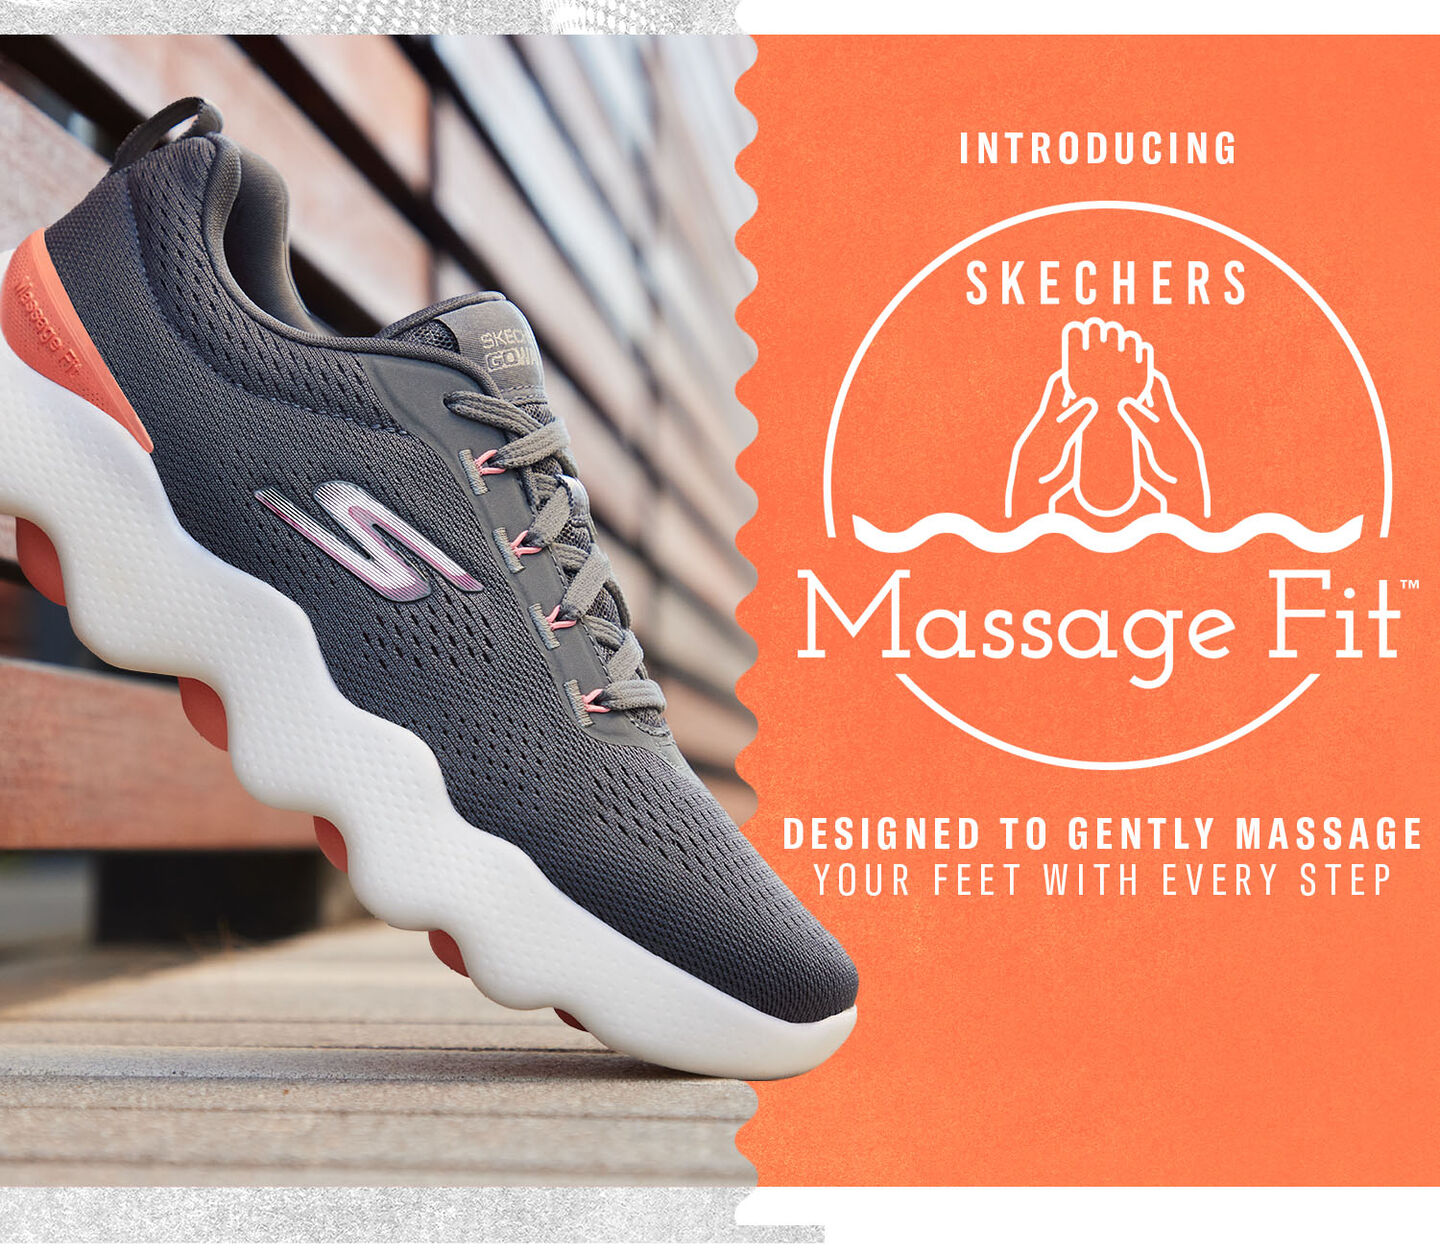 Skechers Massage Fit- Designed to Gently Massage with Every Step